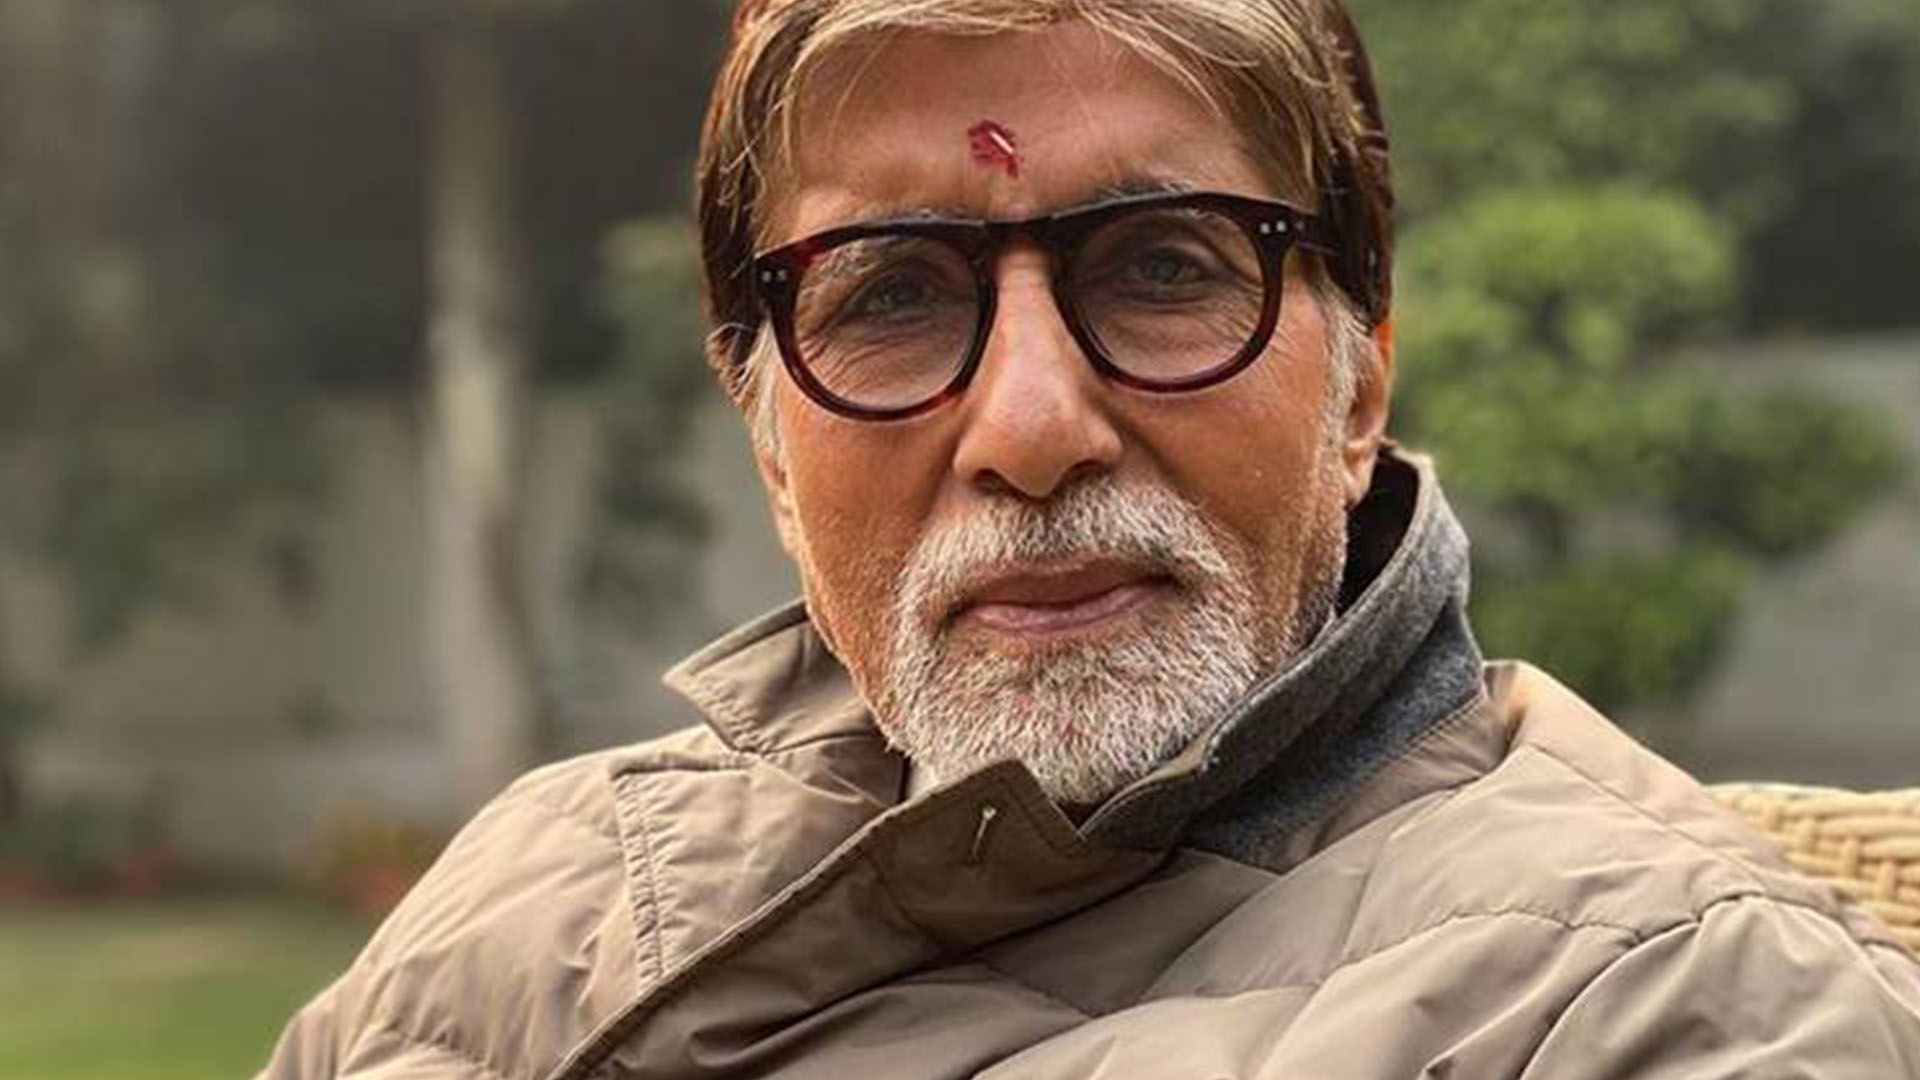 Amitabh Bachchan leaves hospital after testing negative for Covid-19